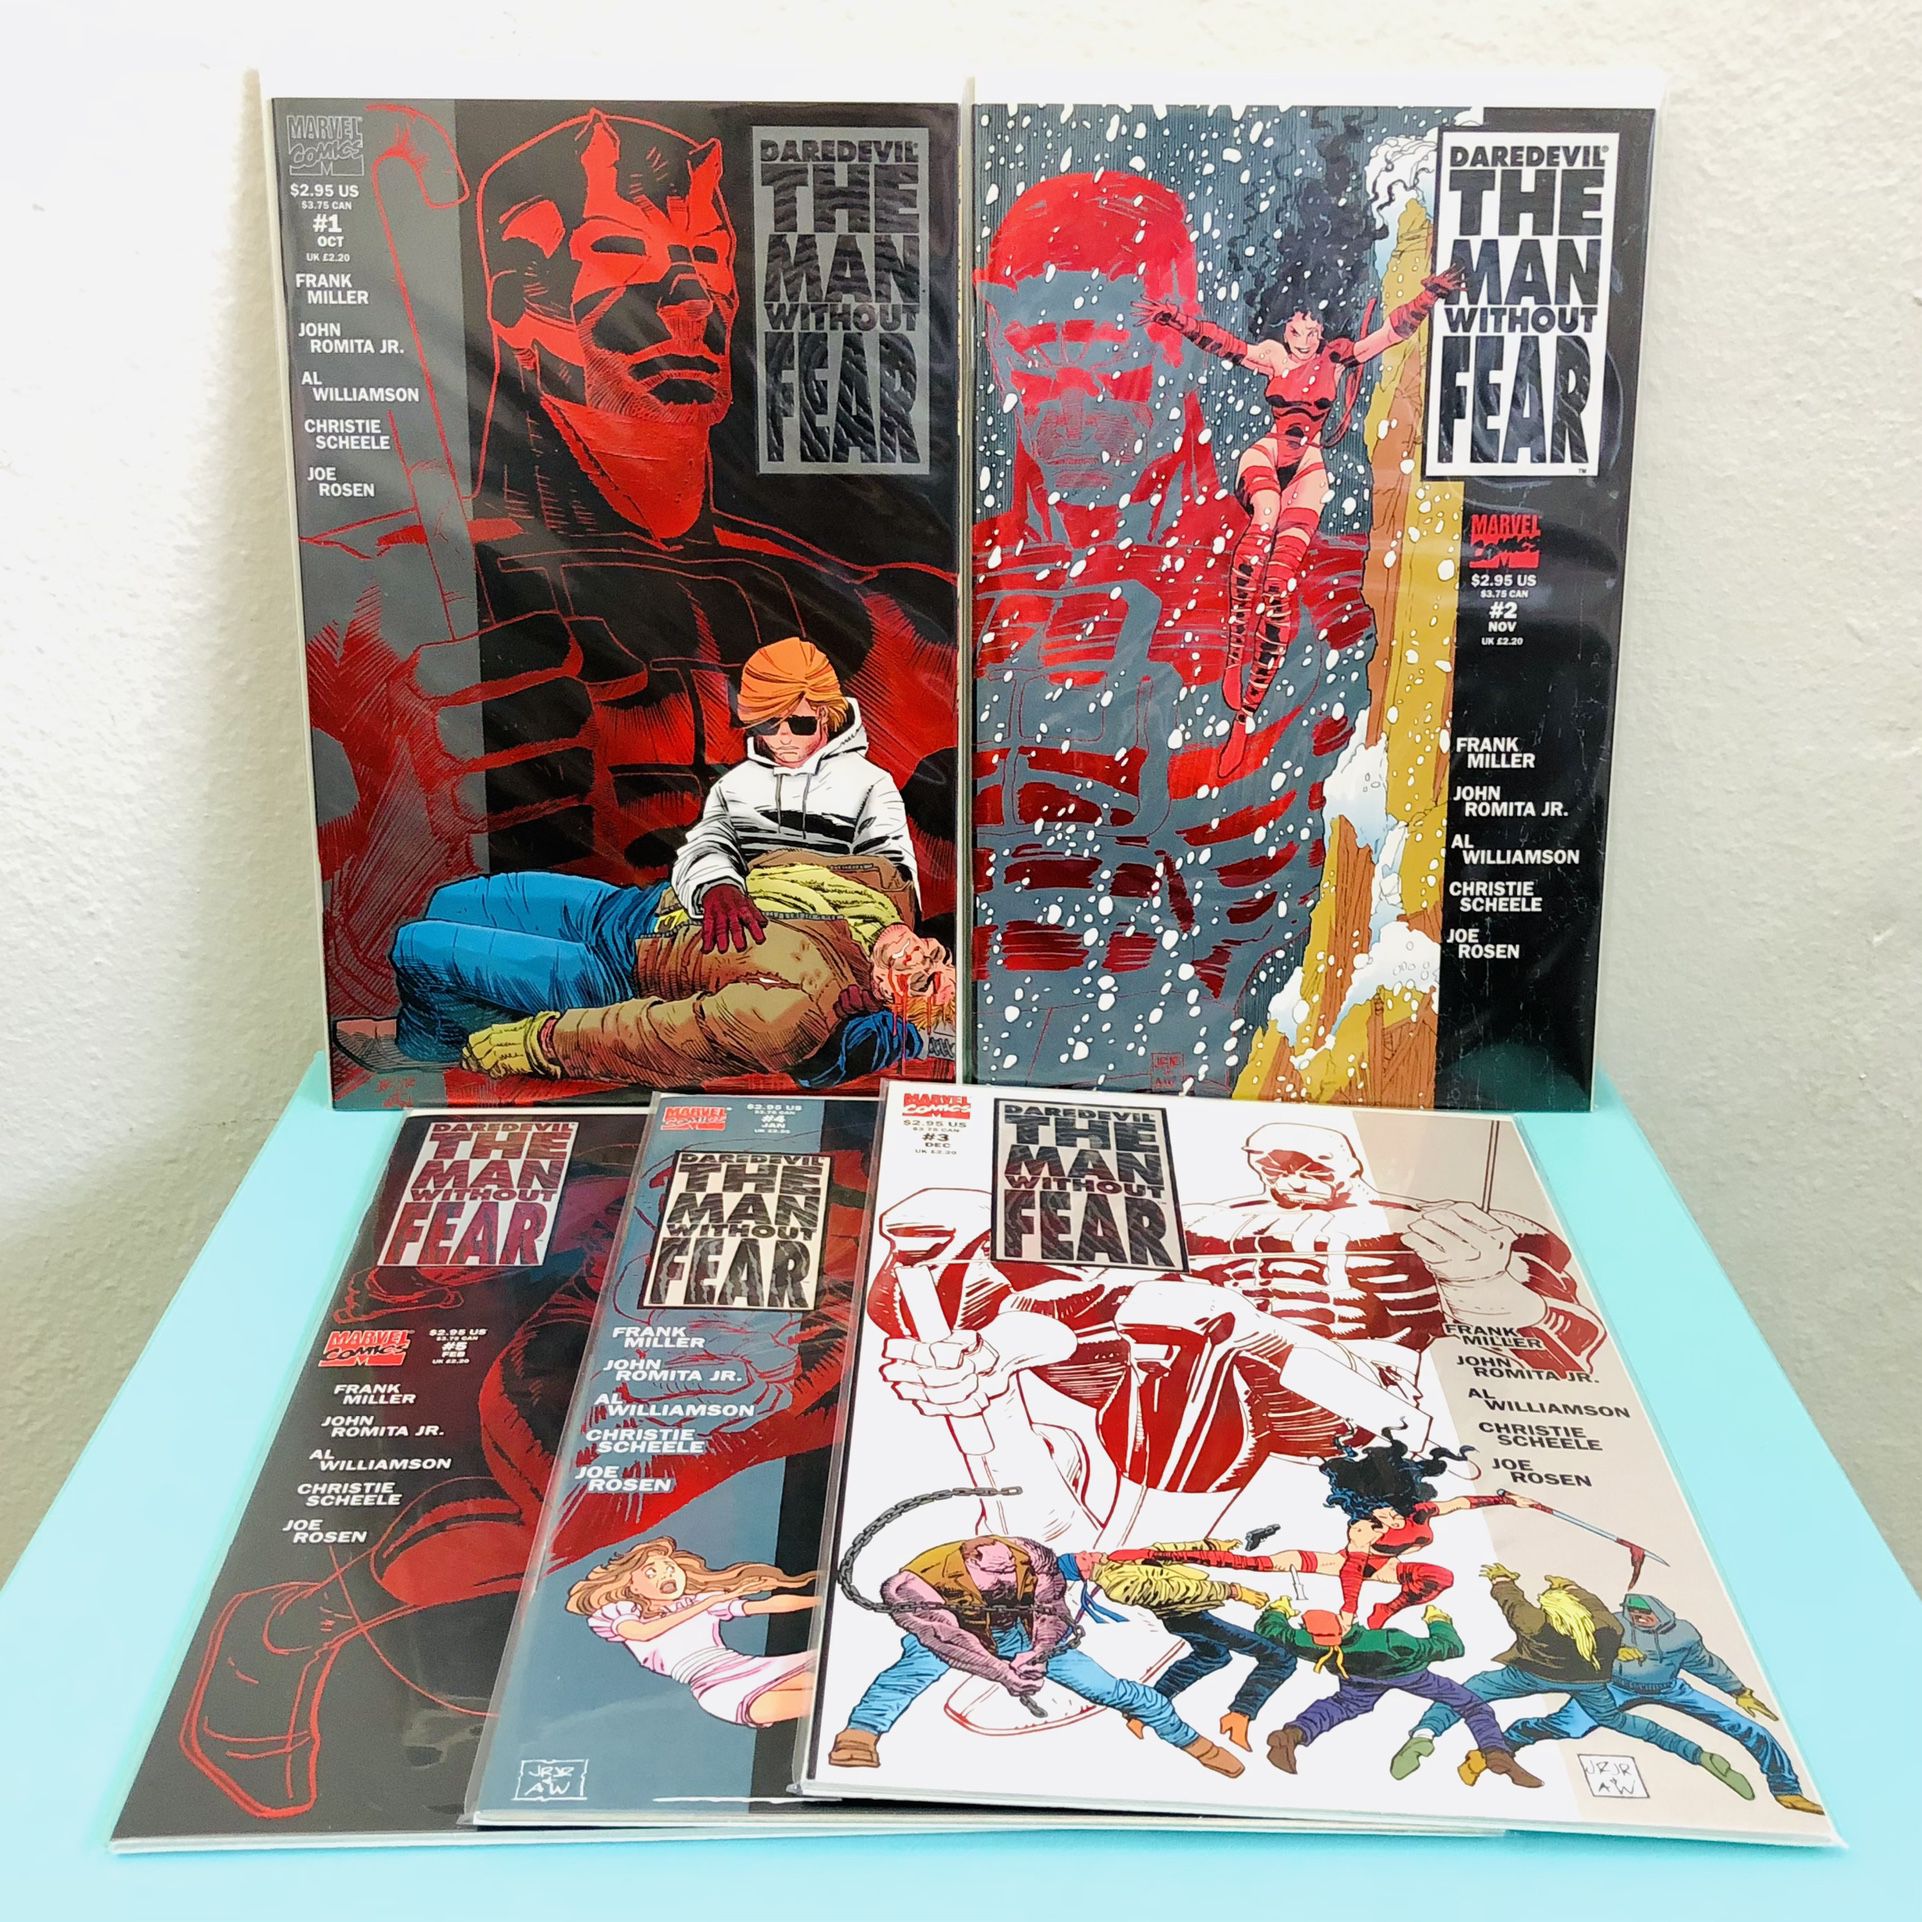 Marvel Comics 👨‍🦯 Frank Miller’s Daredevil: The Man Without Fear #1-5 Complete Mini-series